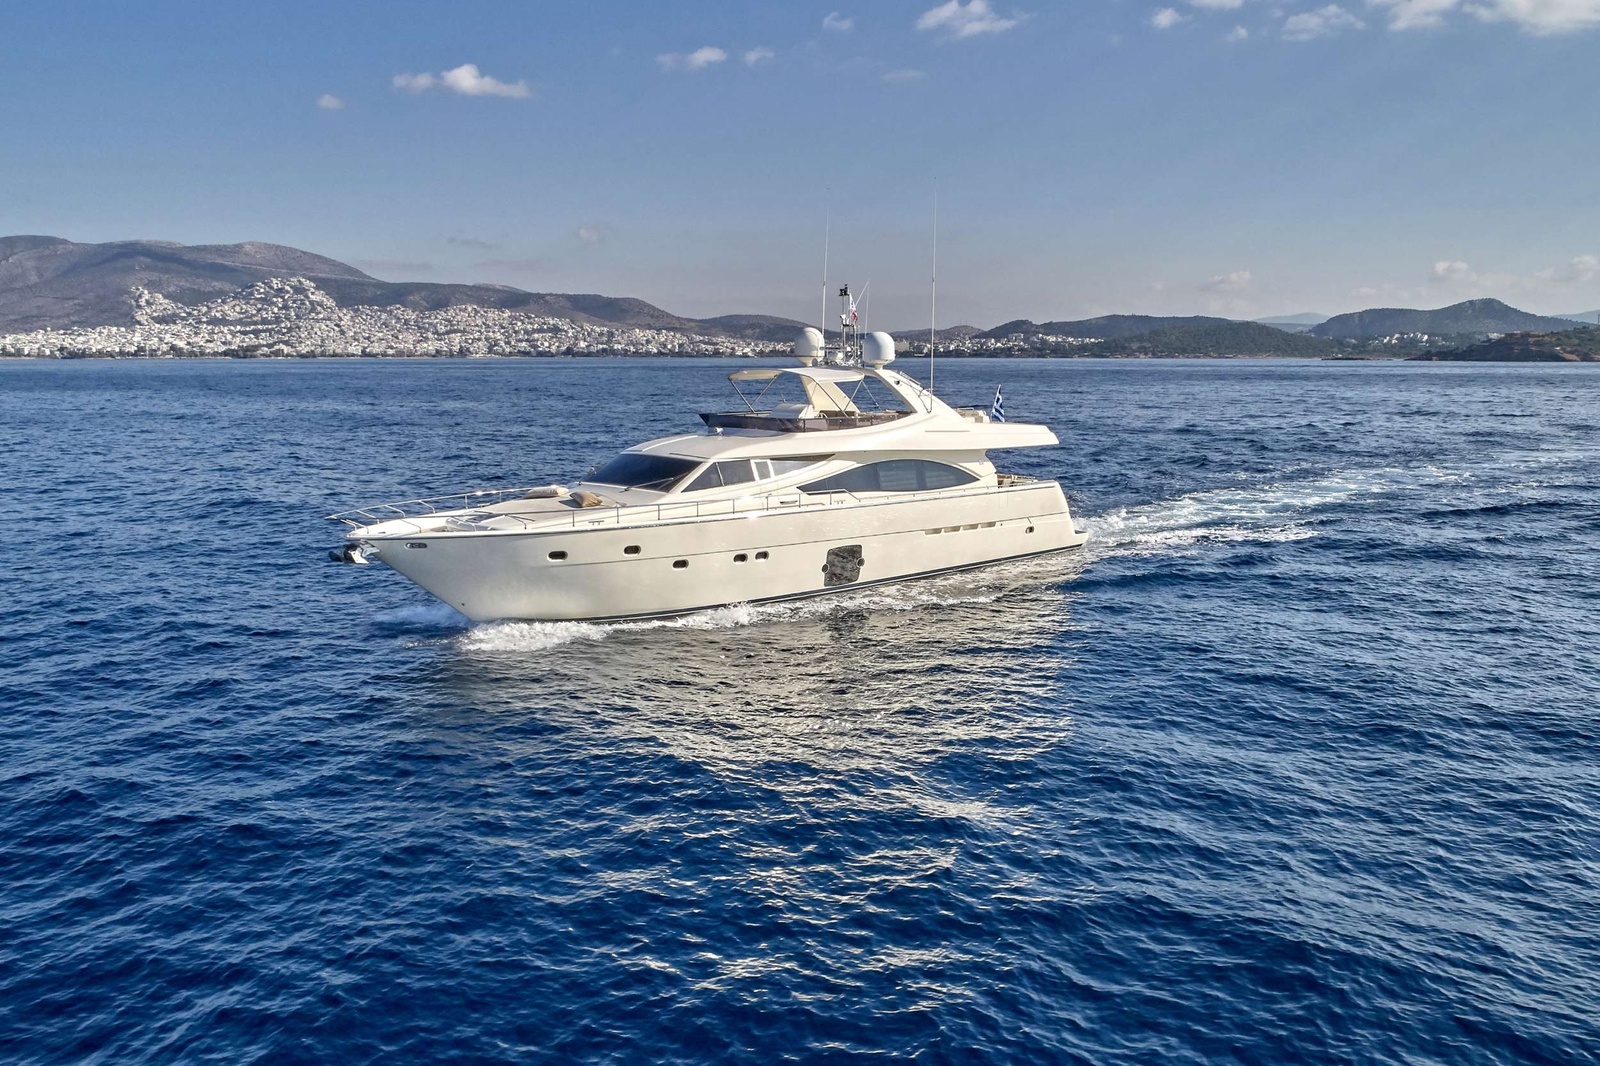 JULIE M is an exceptional yacht: filled with light throughout, contemporary interior design using light oak wood and leather, lots of toys and impeccable service, this Ferretti 830 offers the top charter experience in Greece. Let yourself be charmed!